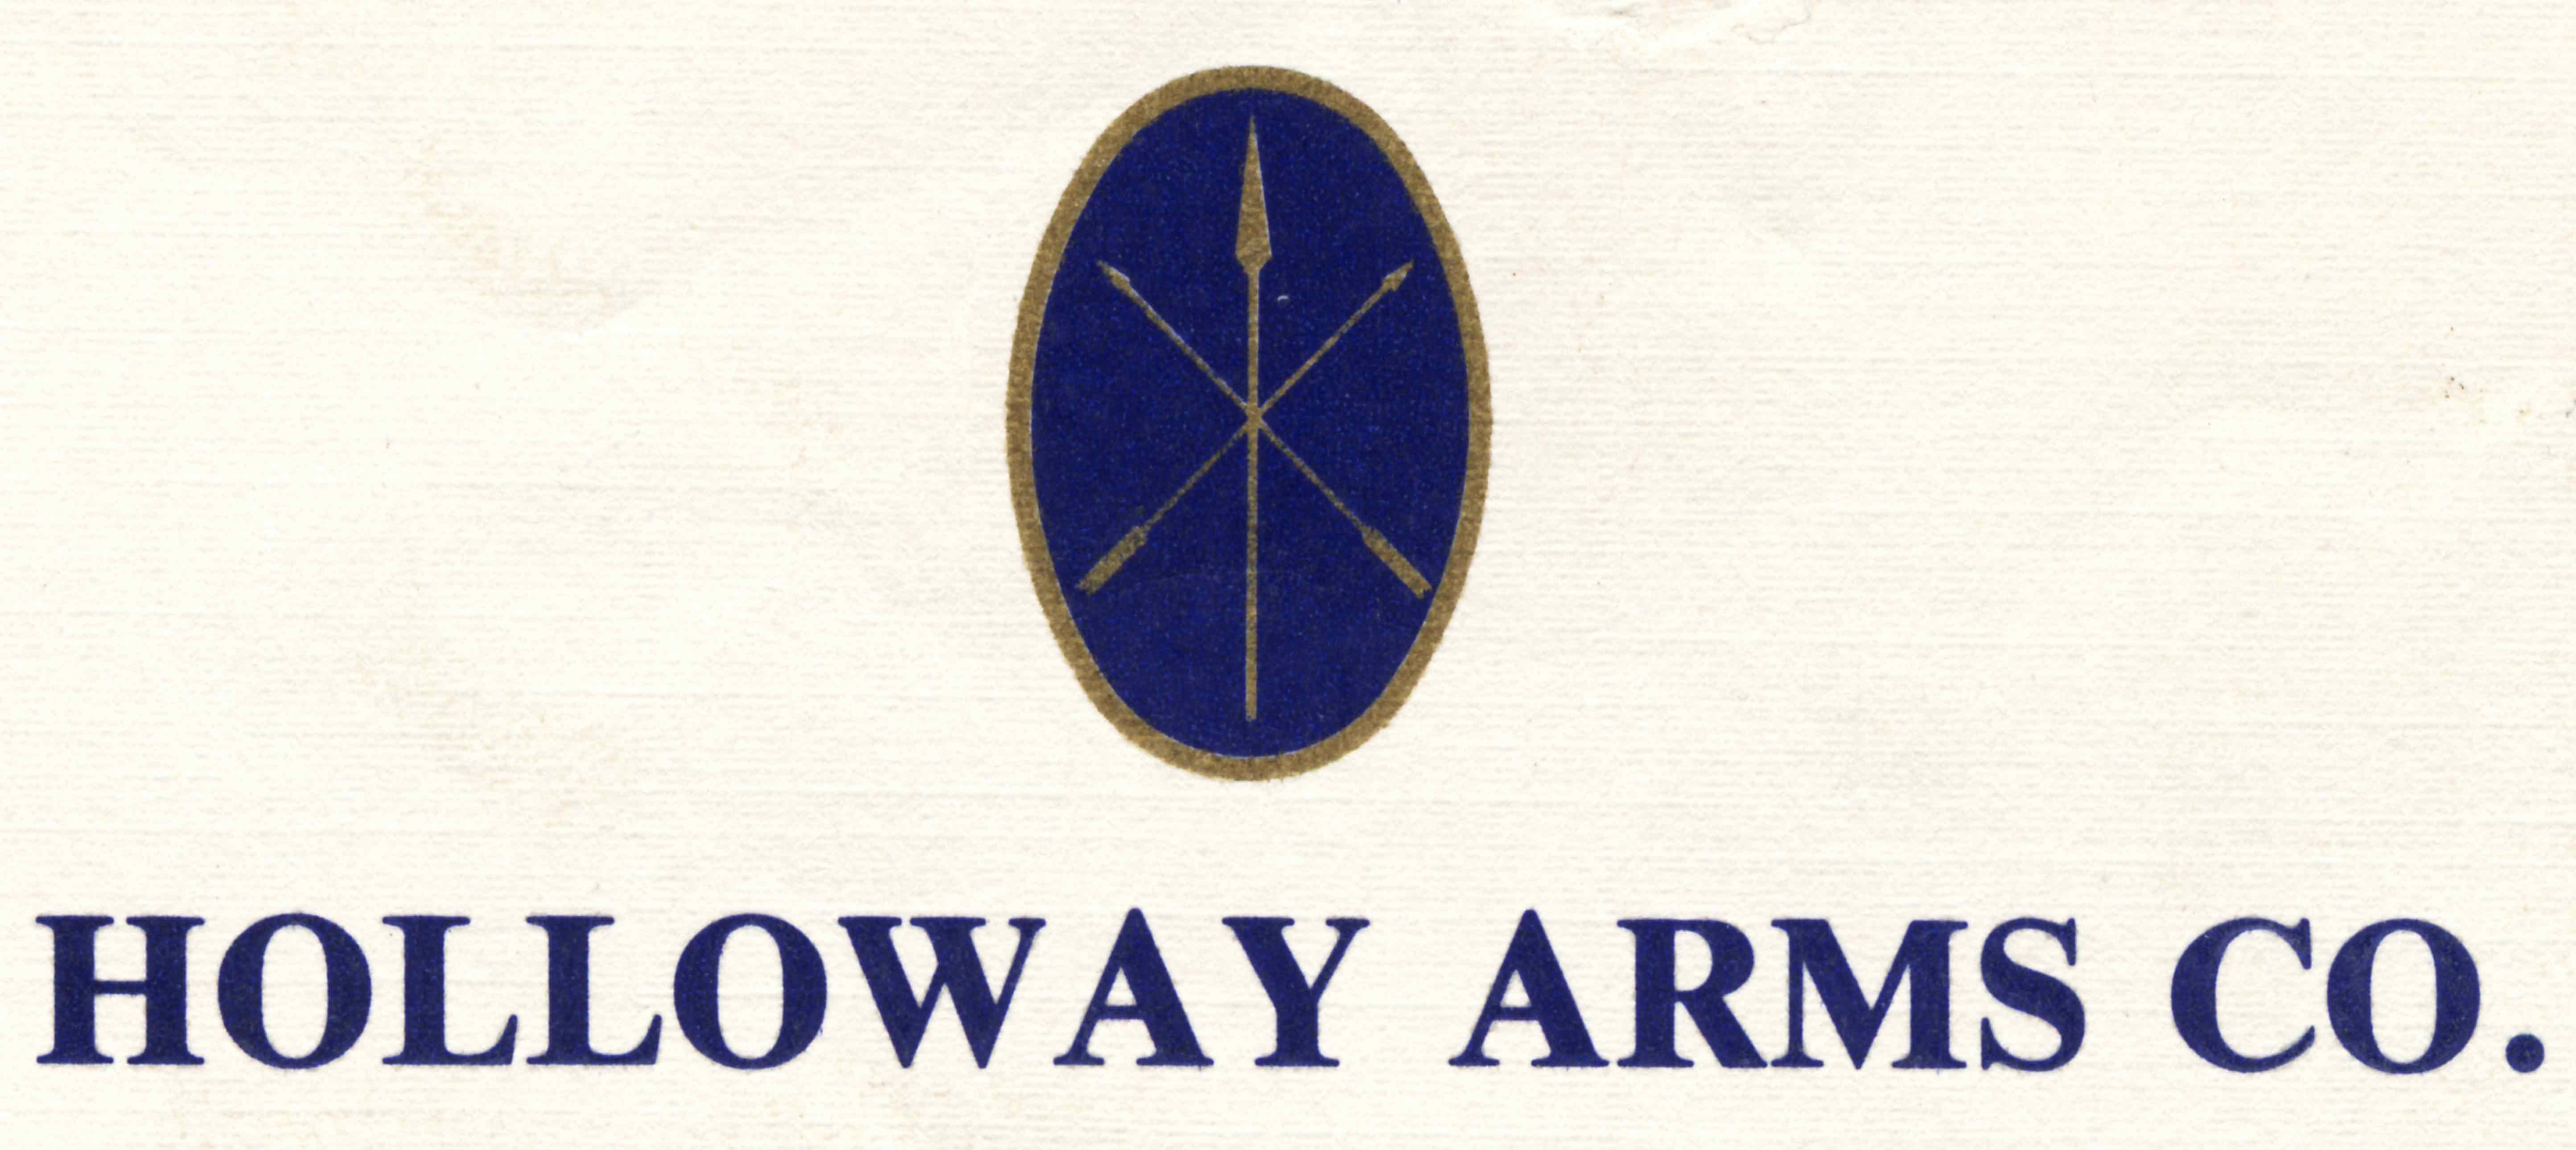  Holloway Arms (ID 31) 